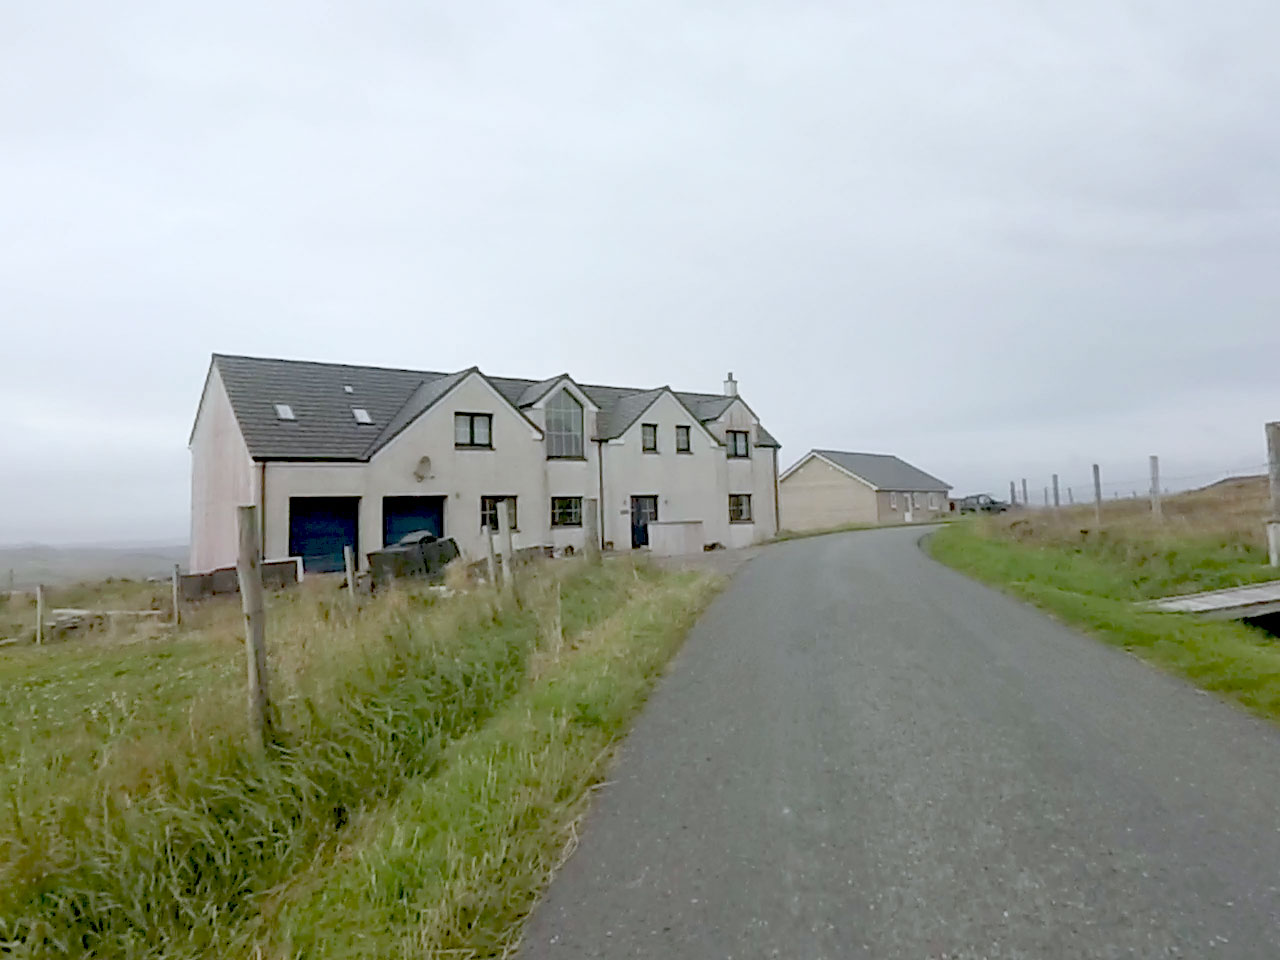 Arriving at brother Paul and family's house in Shetland.